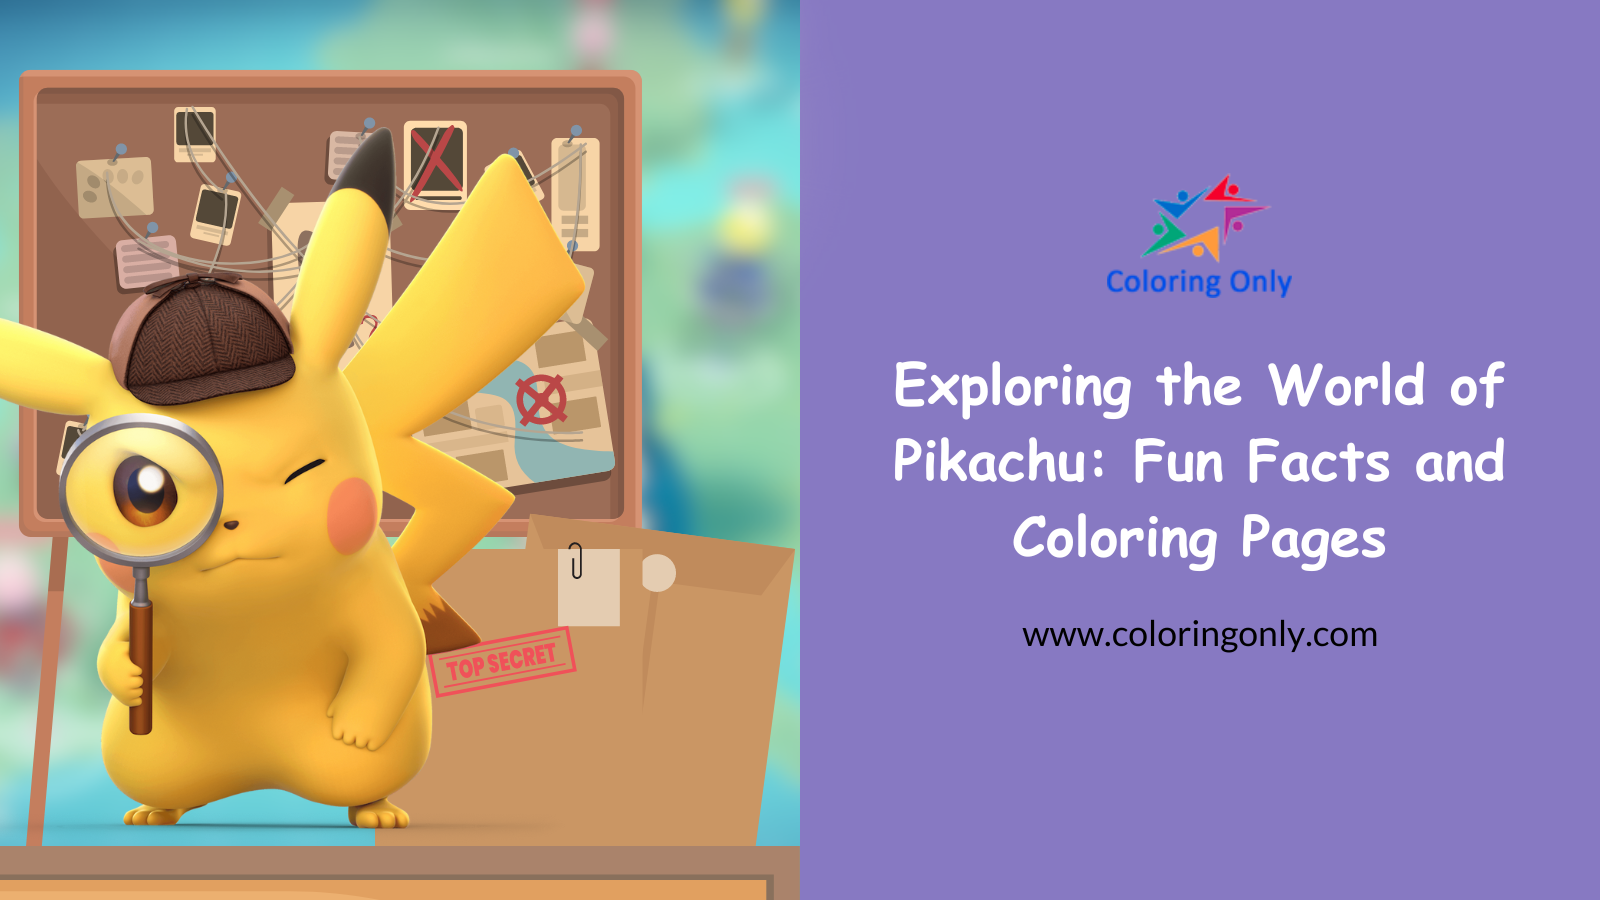 Exploring the World of Pikachu: Fun Facts and Coloring Pages